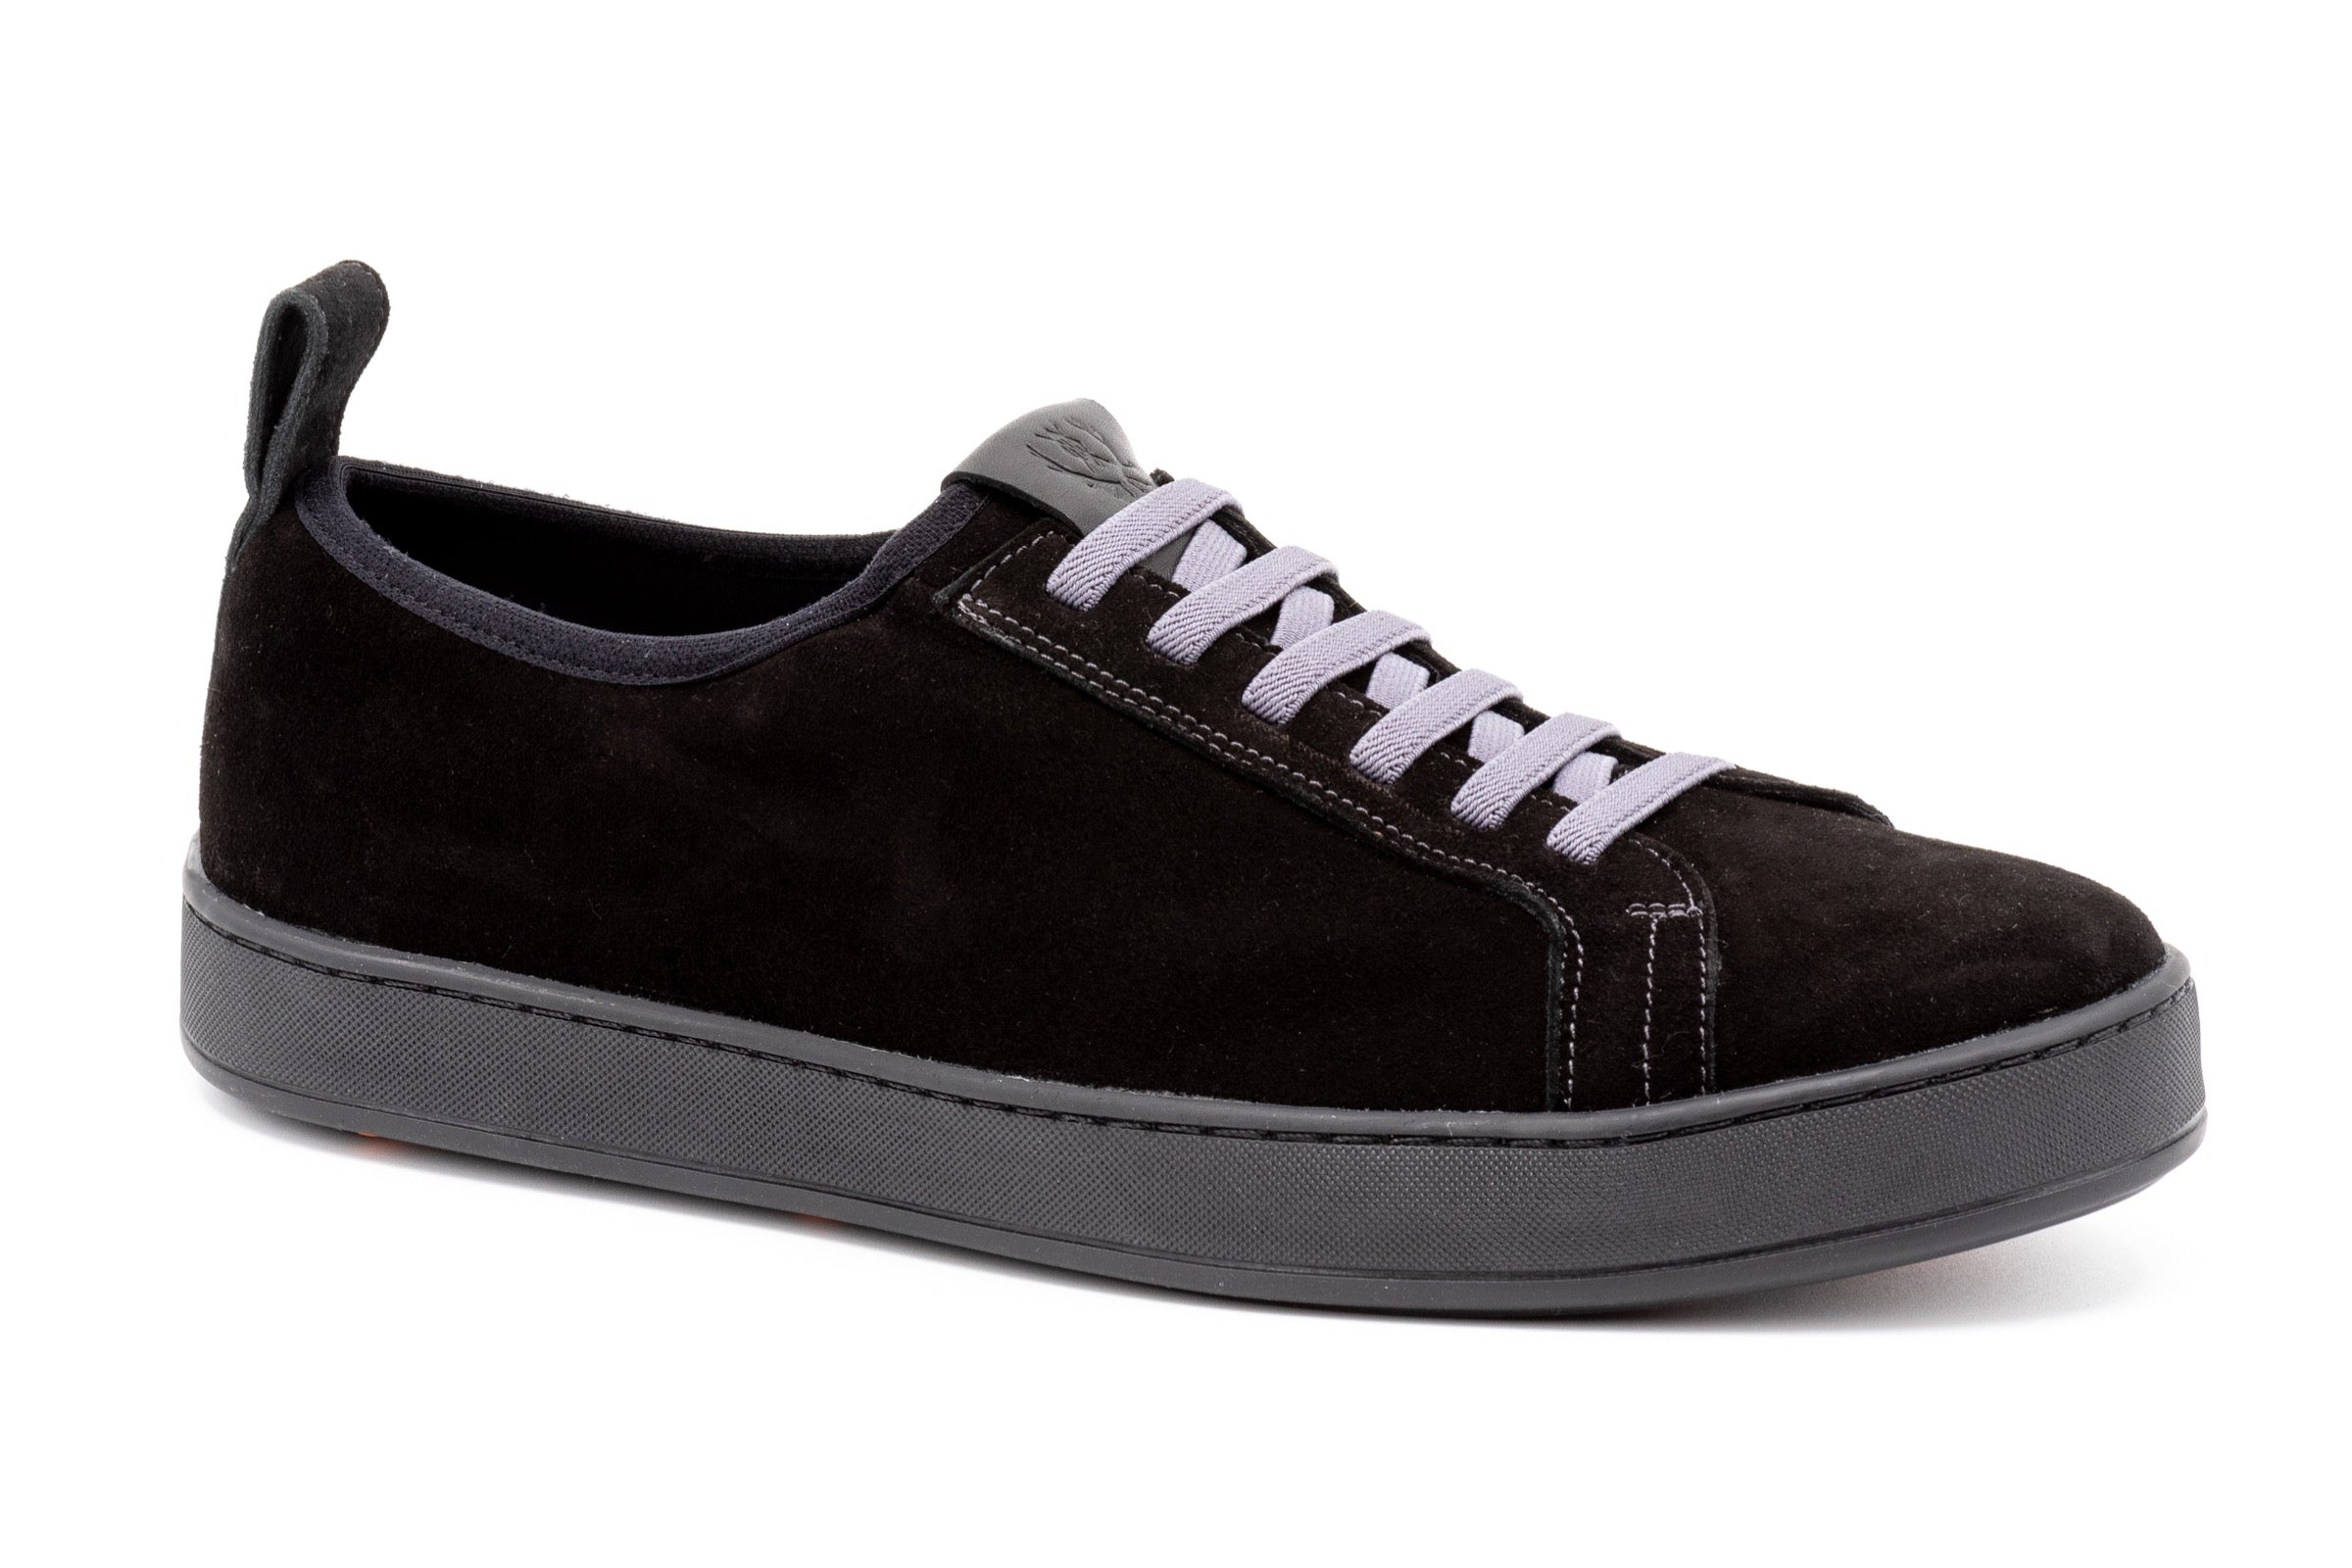 MD Signature Sheep Skin Water Repellent Suede Leather Sneakers Black | Martin Dingman